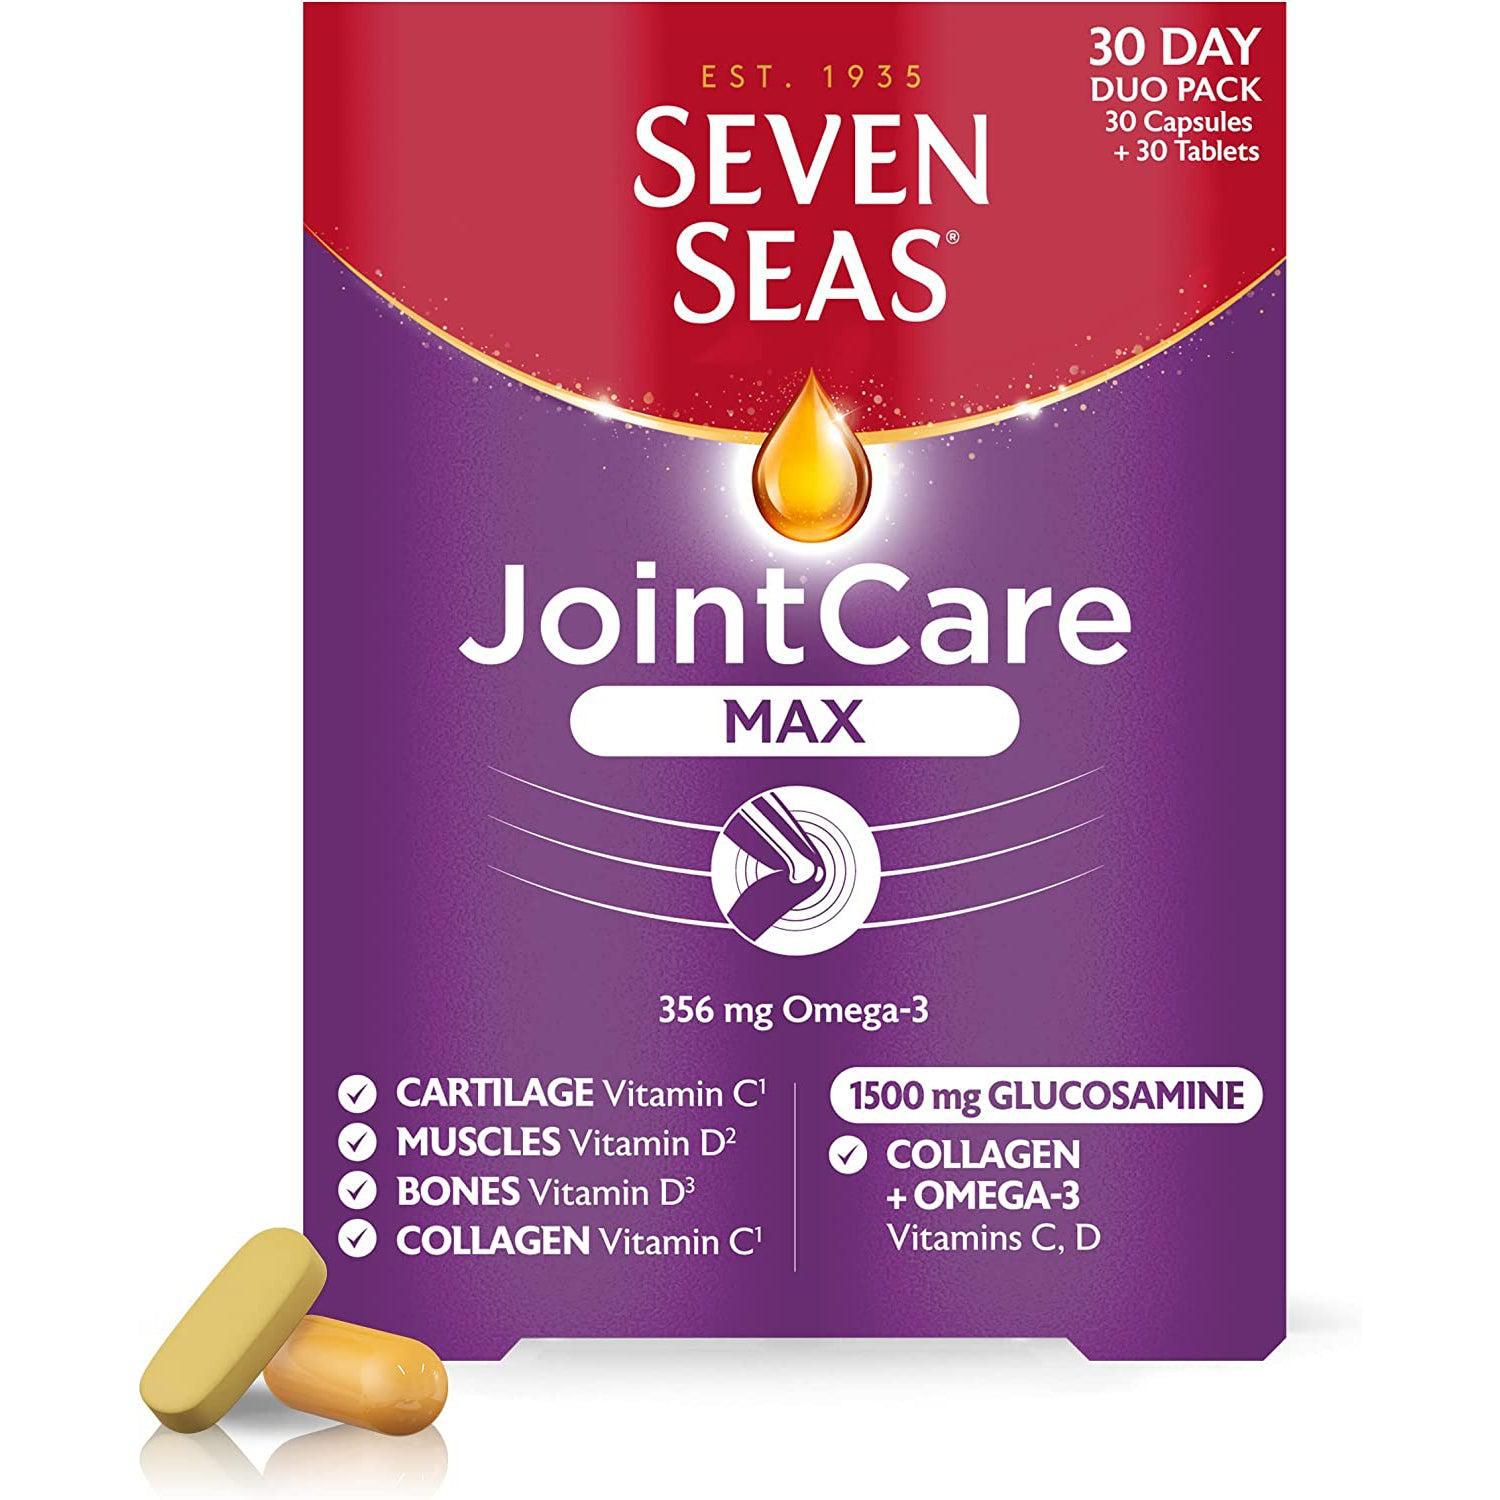 Seven Seas JointCare Supplements, Max, 356 mg Omega-3, Vit C&D -60 Capsules - Healthxpress.ie